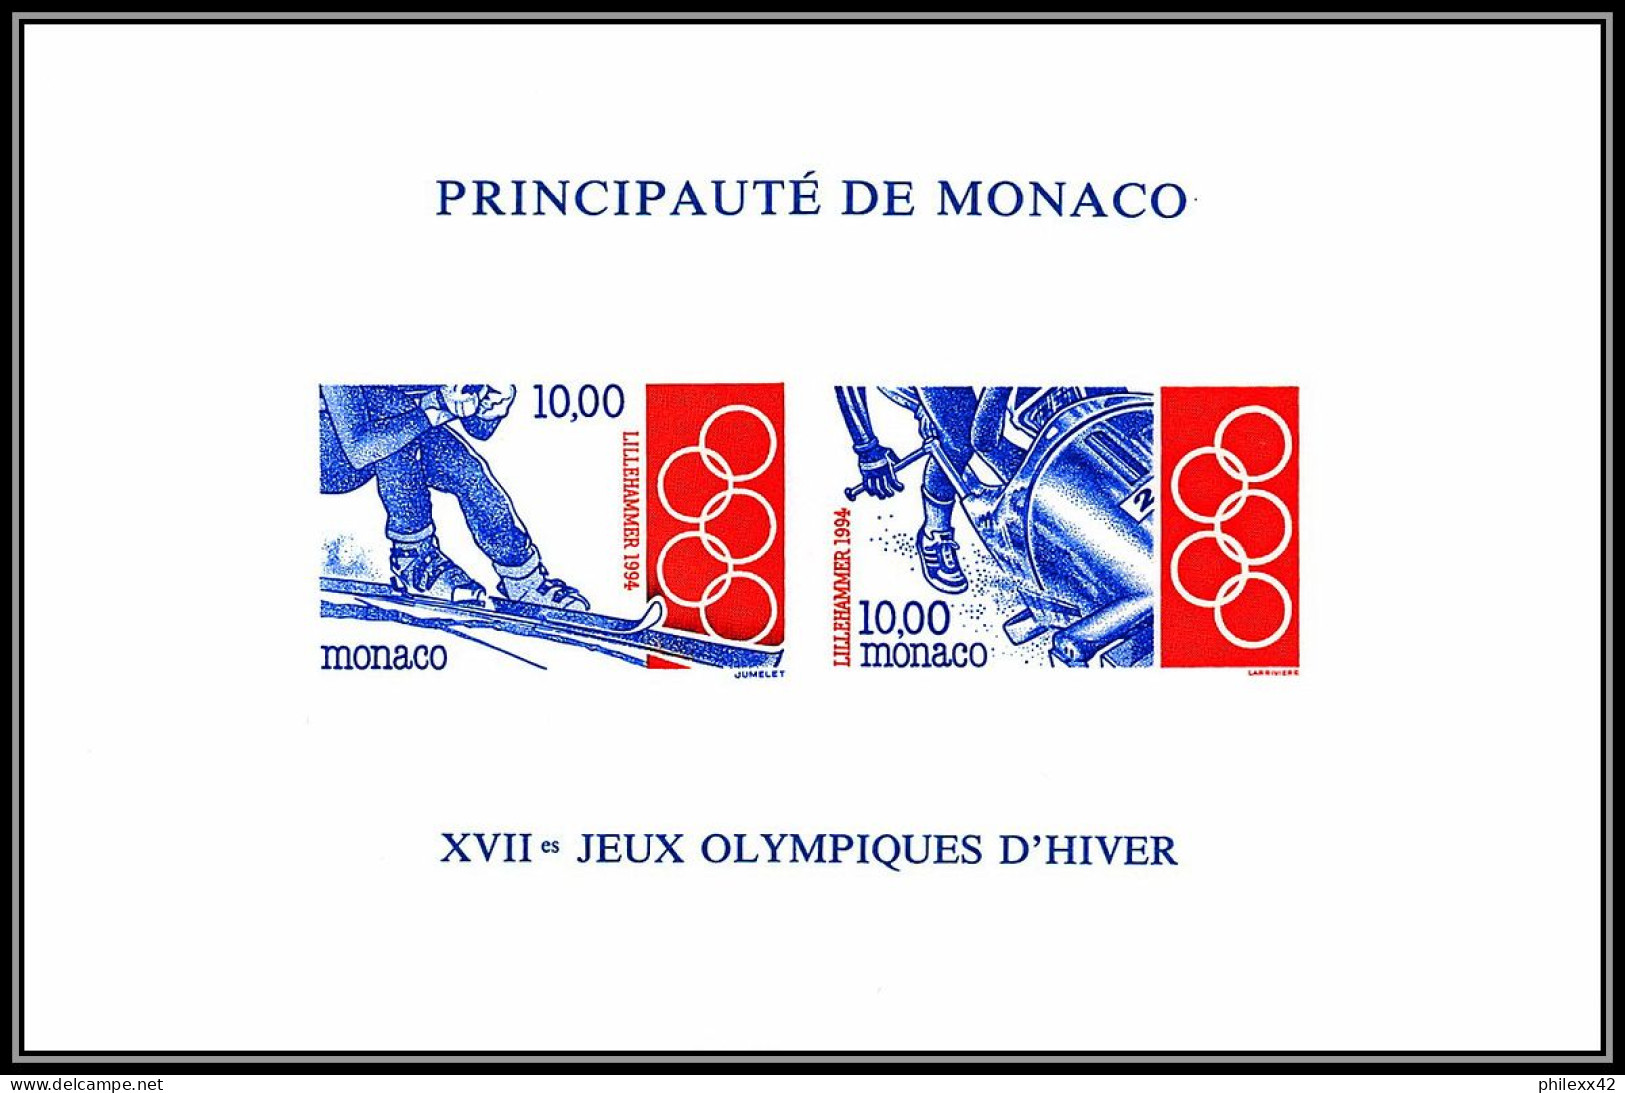 85264 Bloc Collectif BF N°63 Lillehammer 1994 Jeux Olympiques (olympic Games) Monaco Non Dentelé ** MNH Imperf - Hiver 1994: Lillehammer